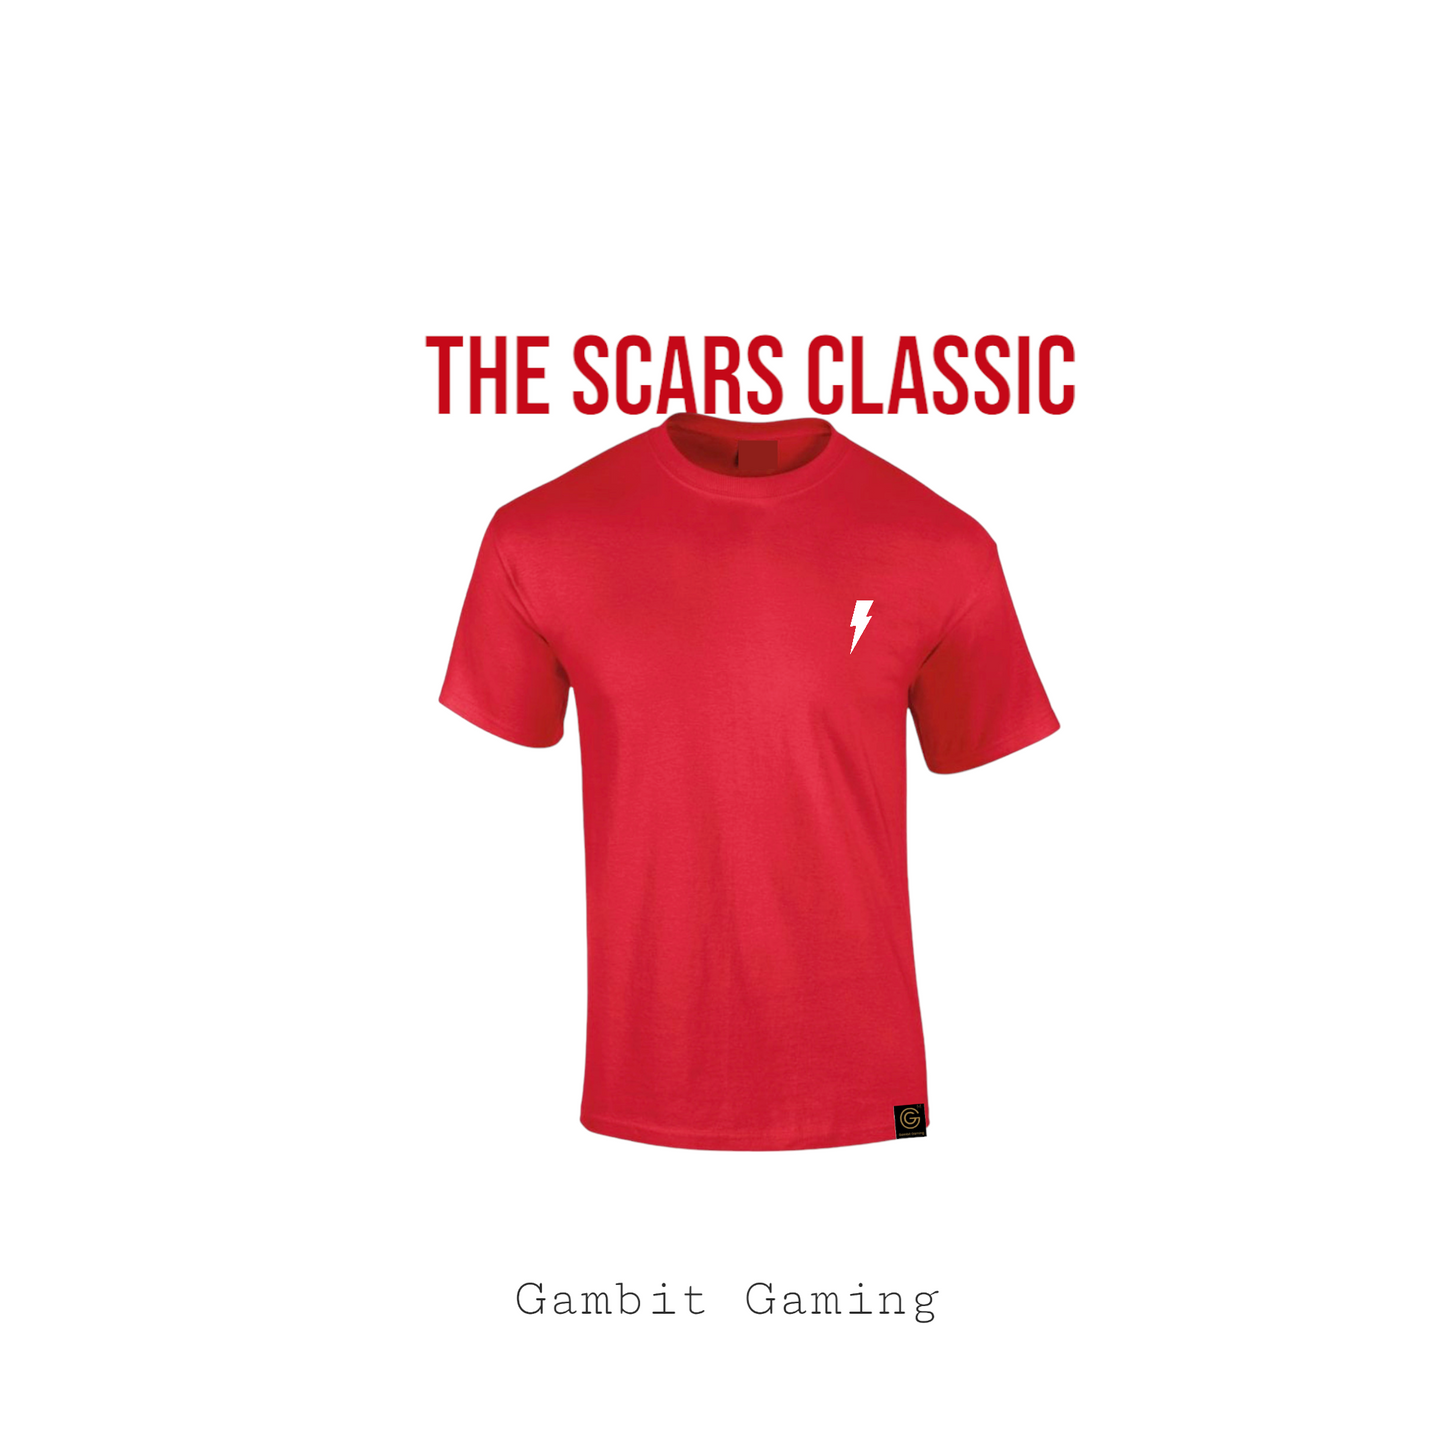 The Scars Classic